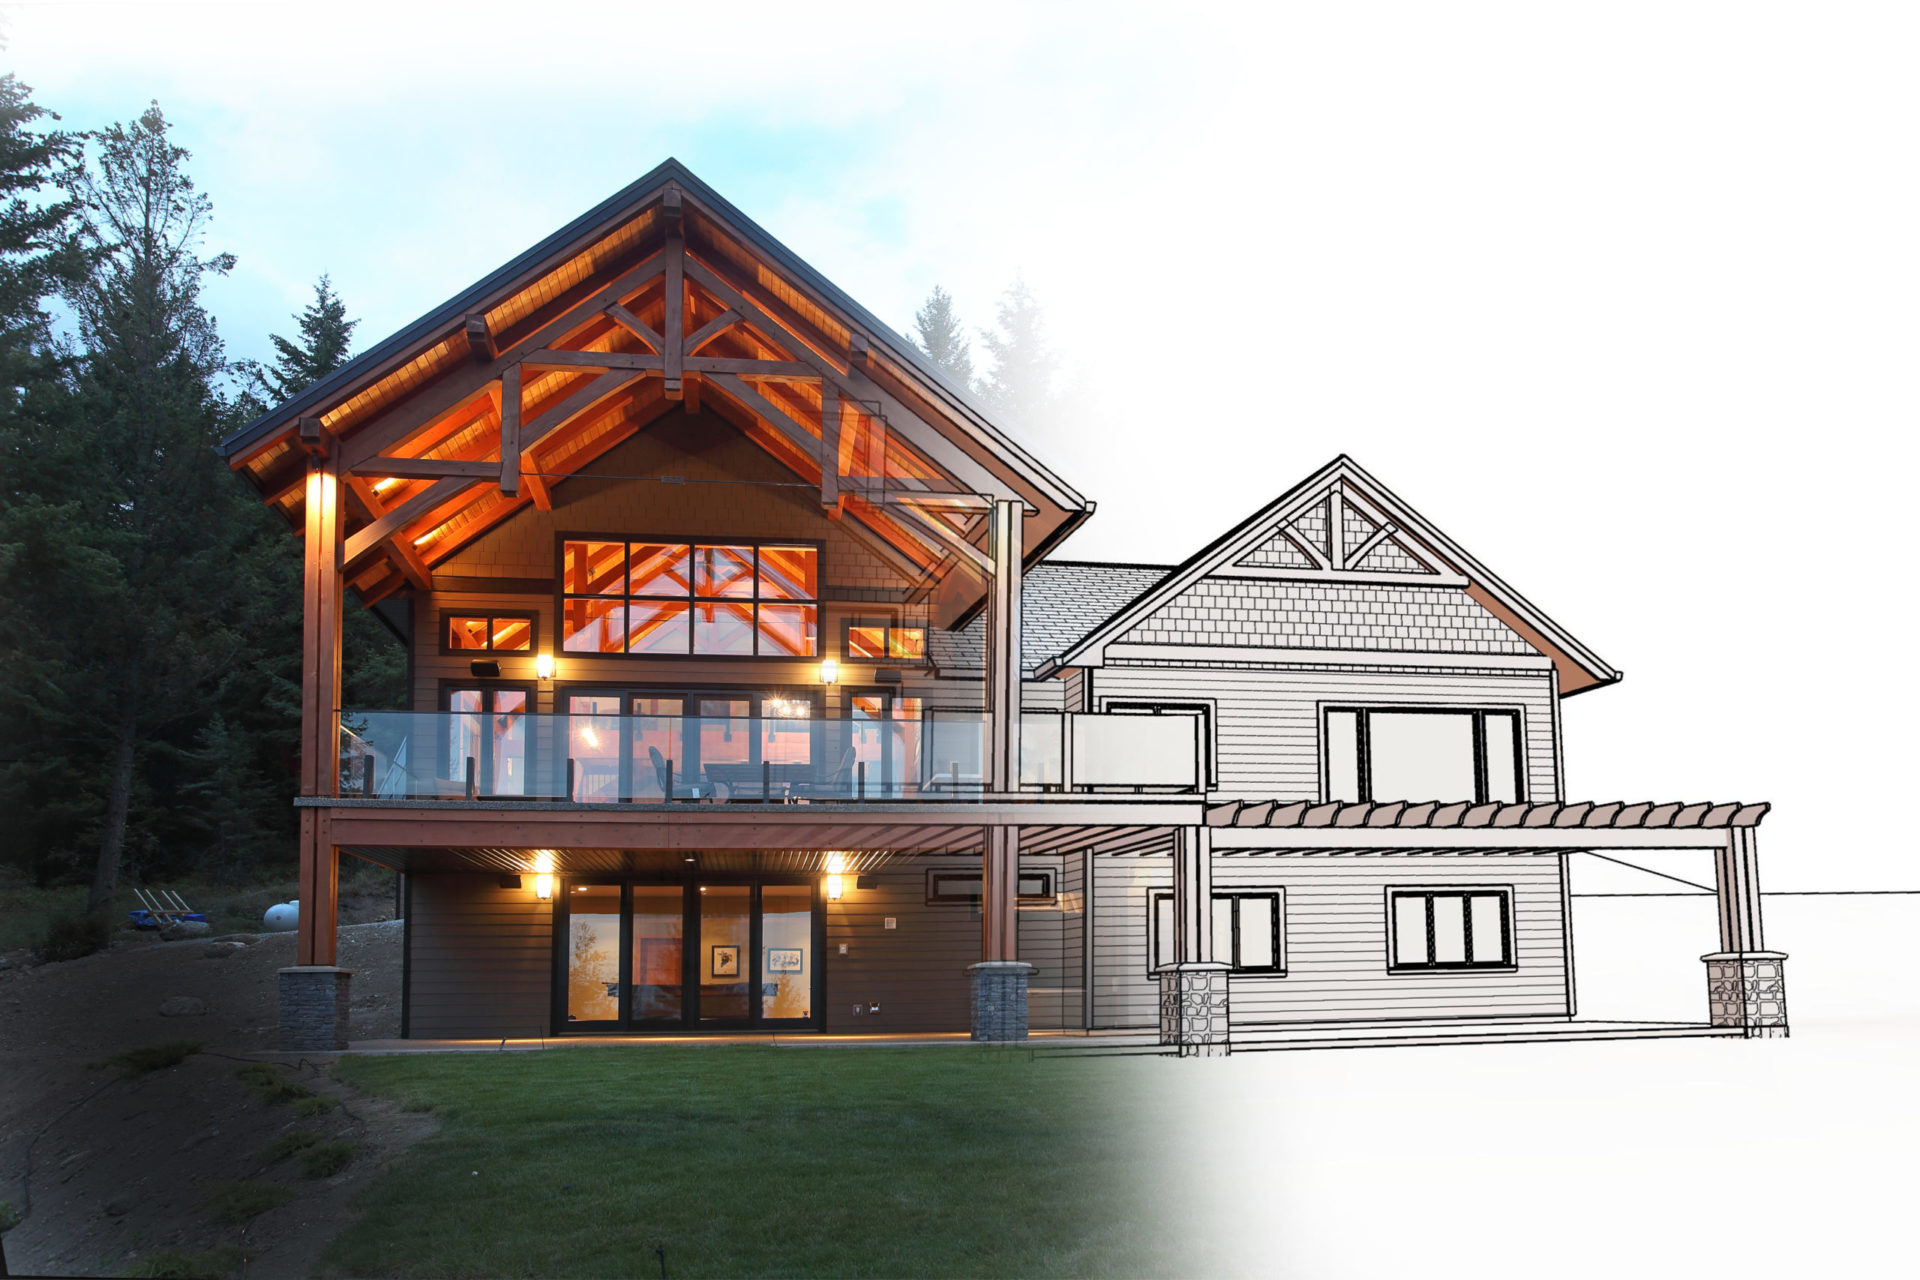 Exterior picture of timber frame home, half of the home fading into blue print.